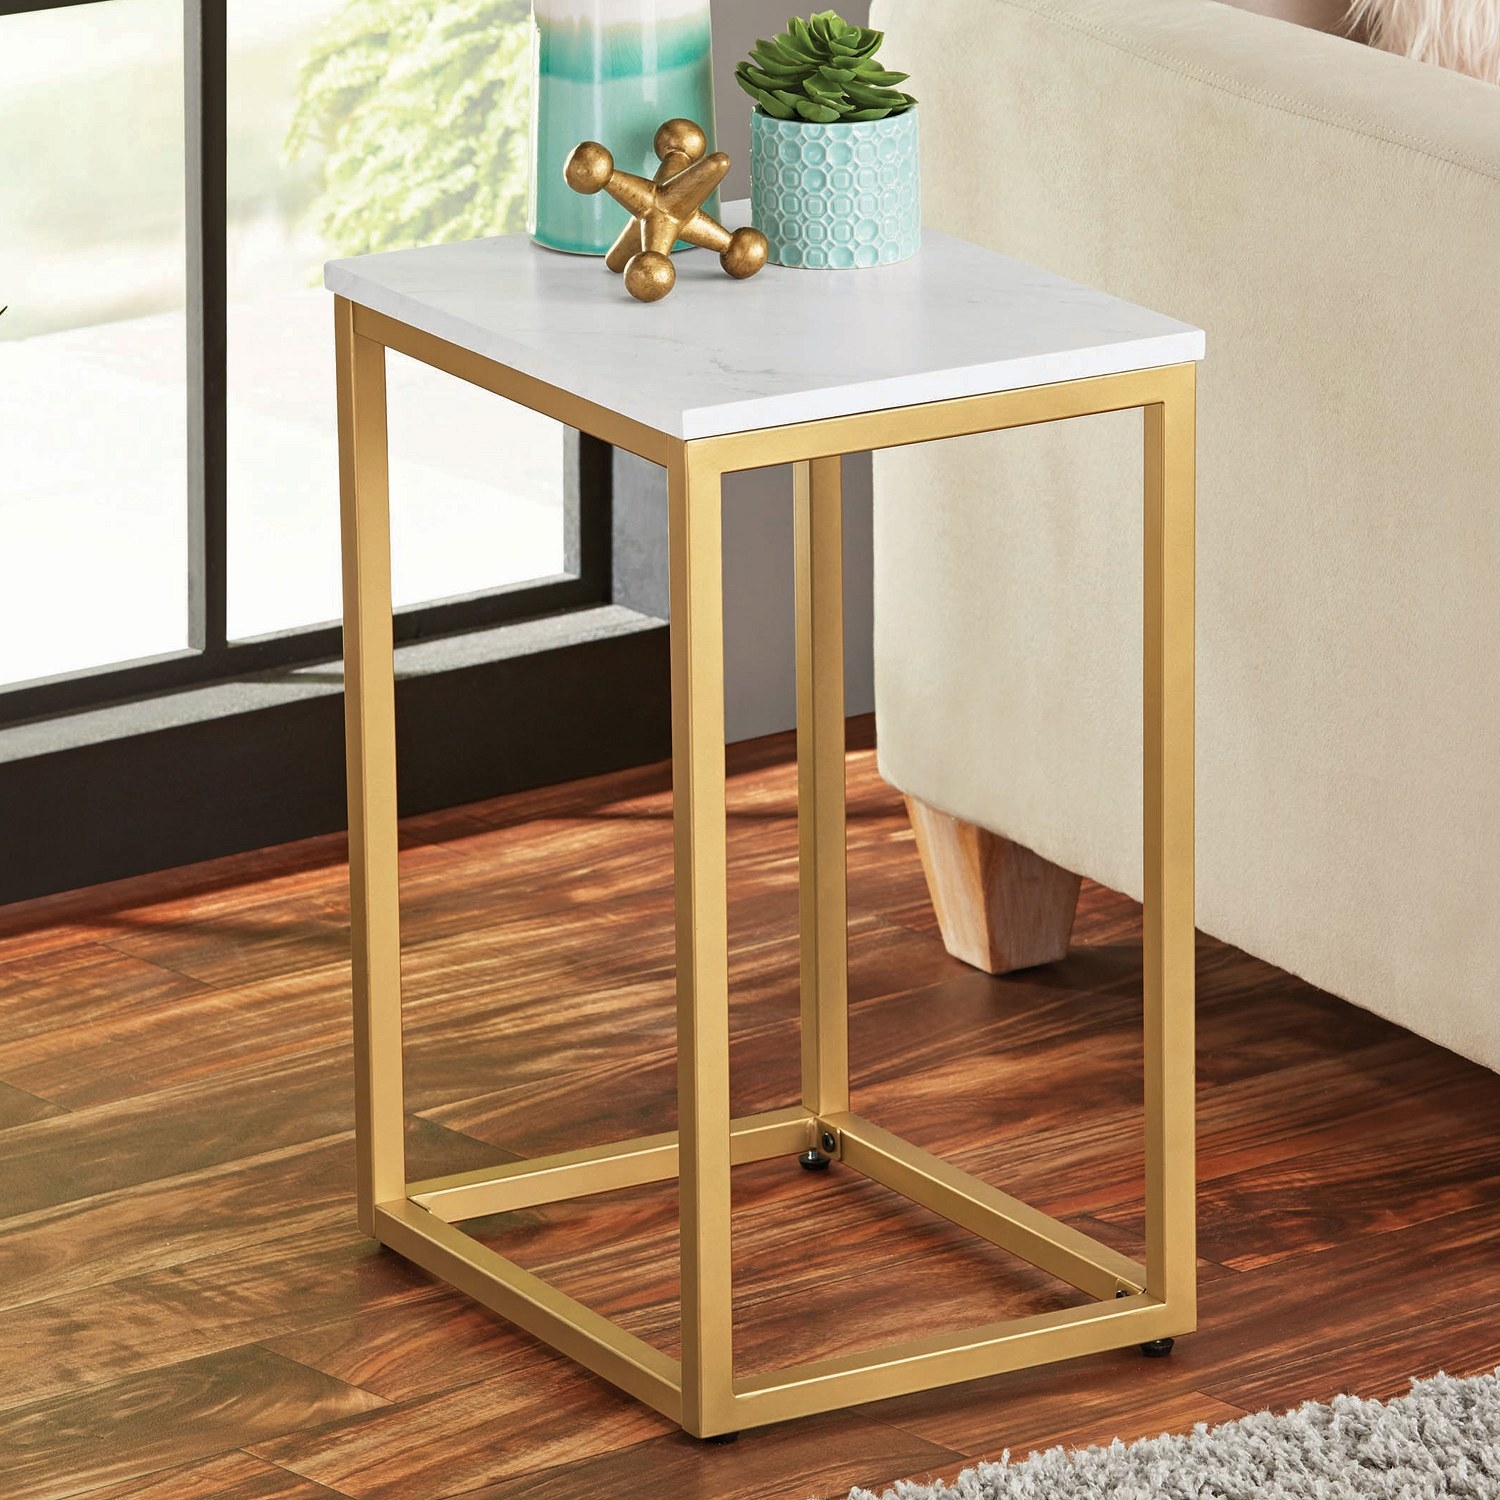 The end table with decorative items on top